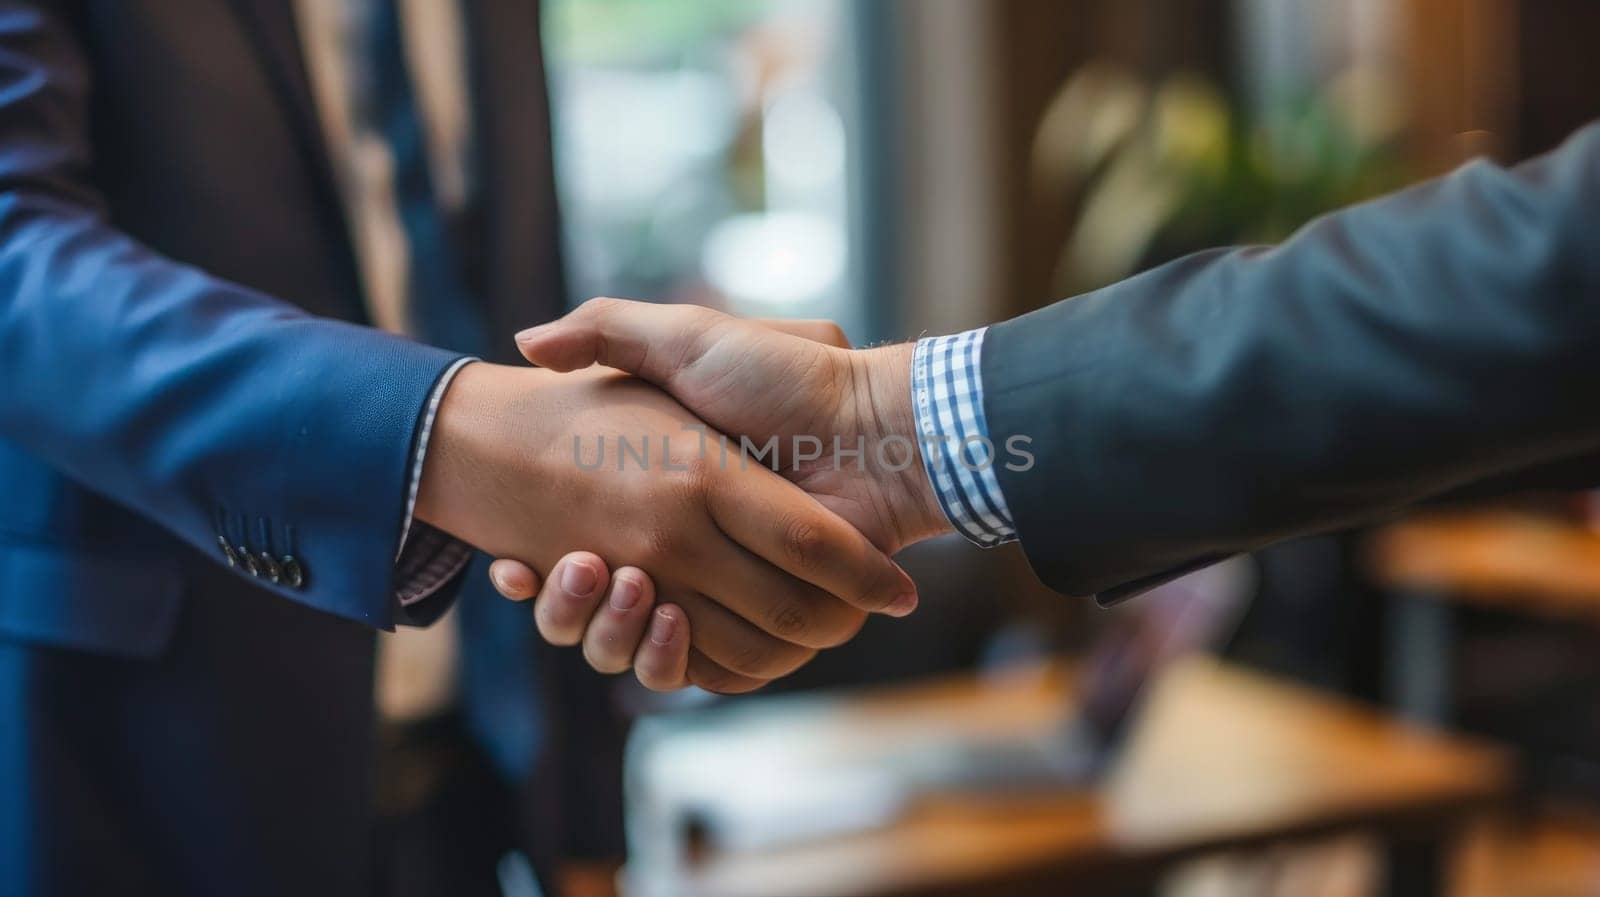 Man employer is shaking hands to congratulate the new employee after successful job interview, Job seeker.